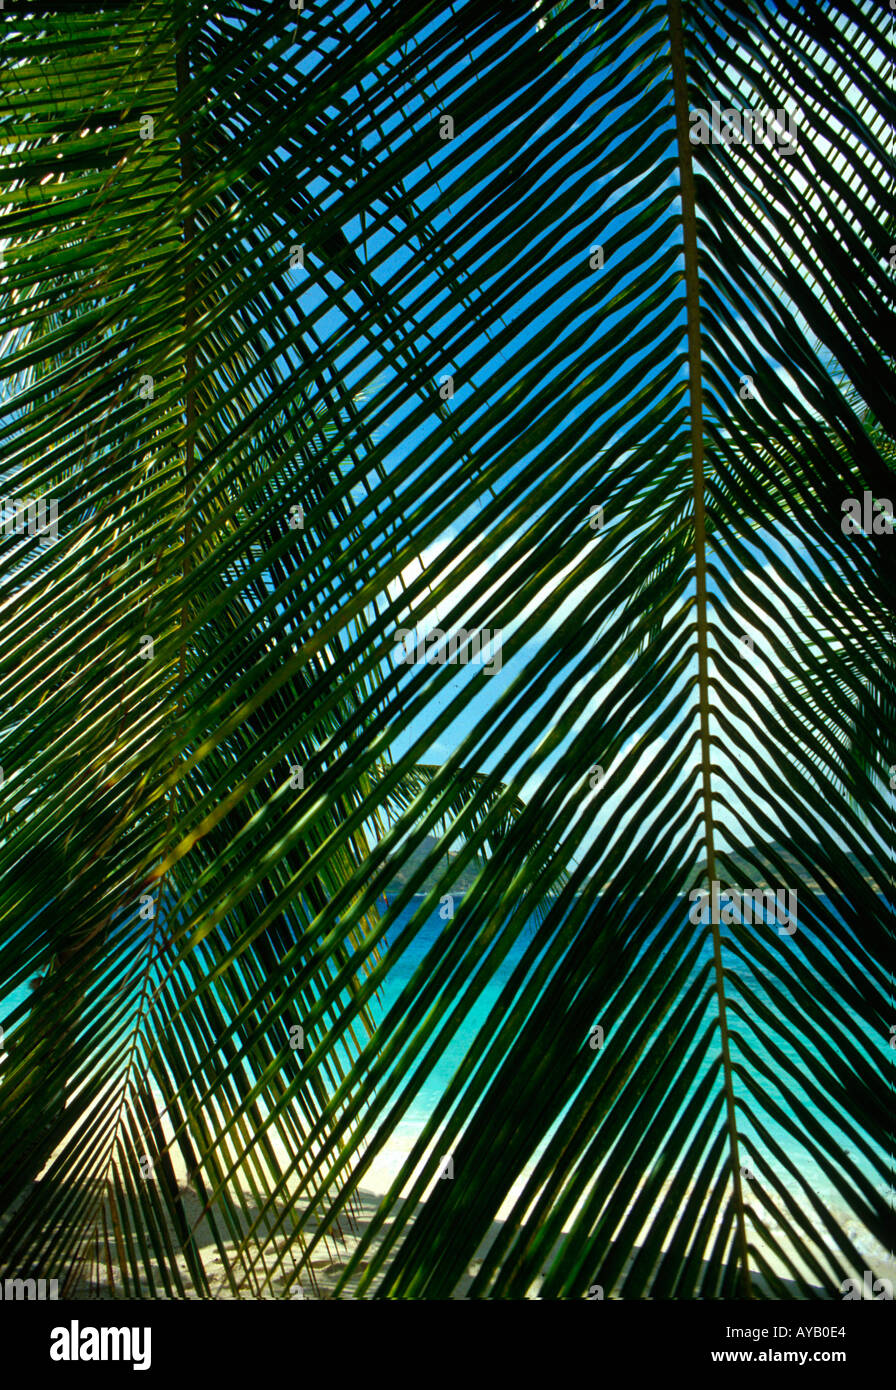 Design of Palm leaves Stock Photo